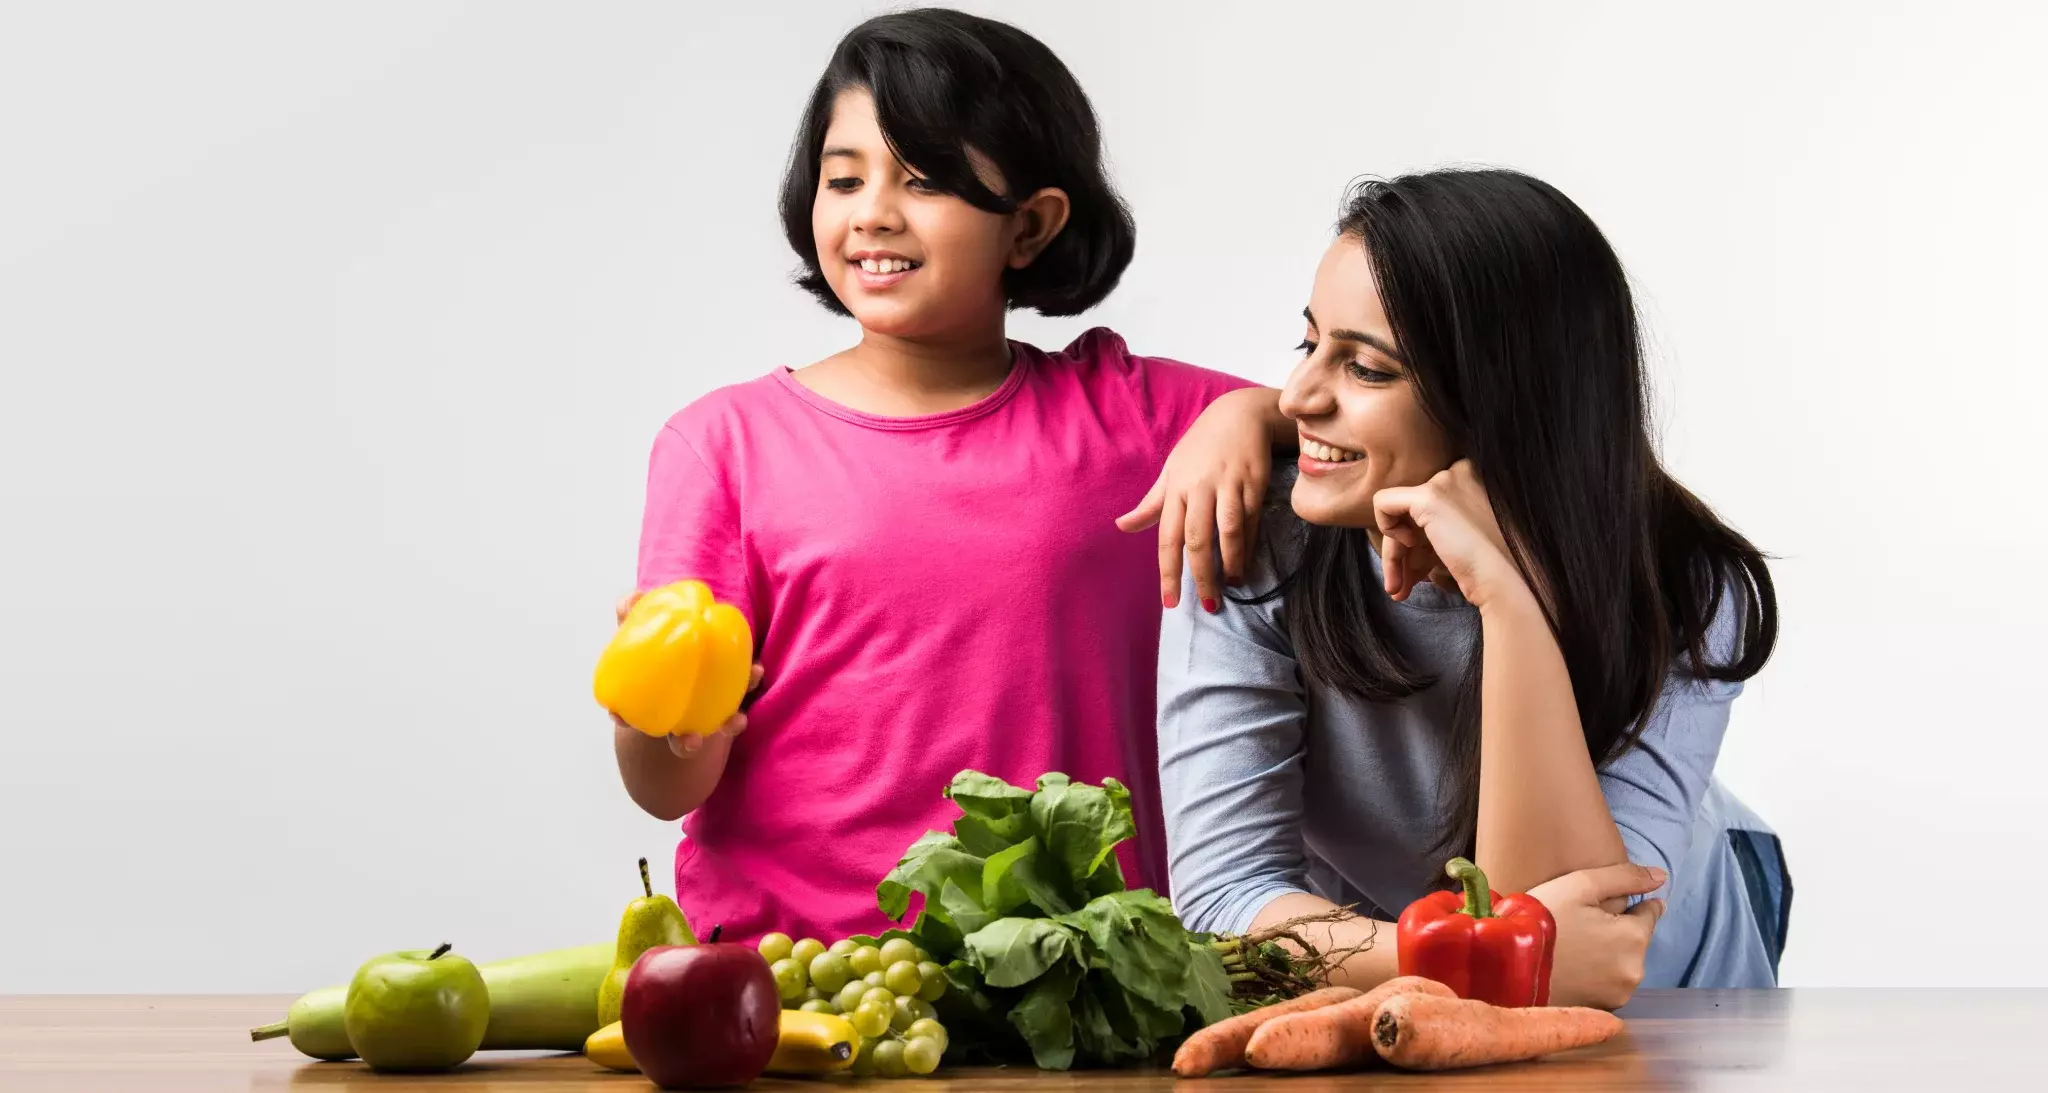 food-pyramid-for-kids-teens-key-to-healthy-eating-habits